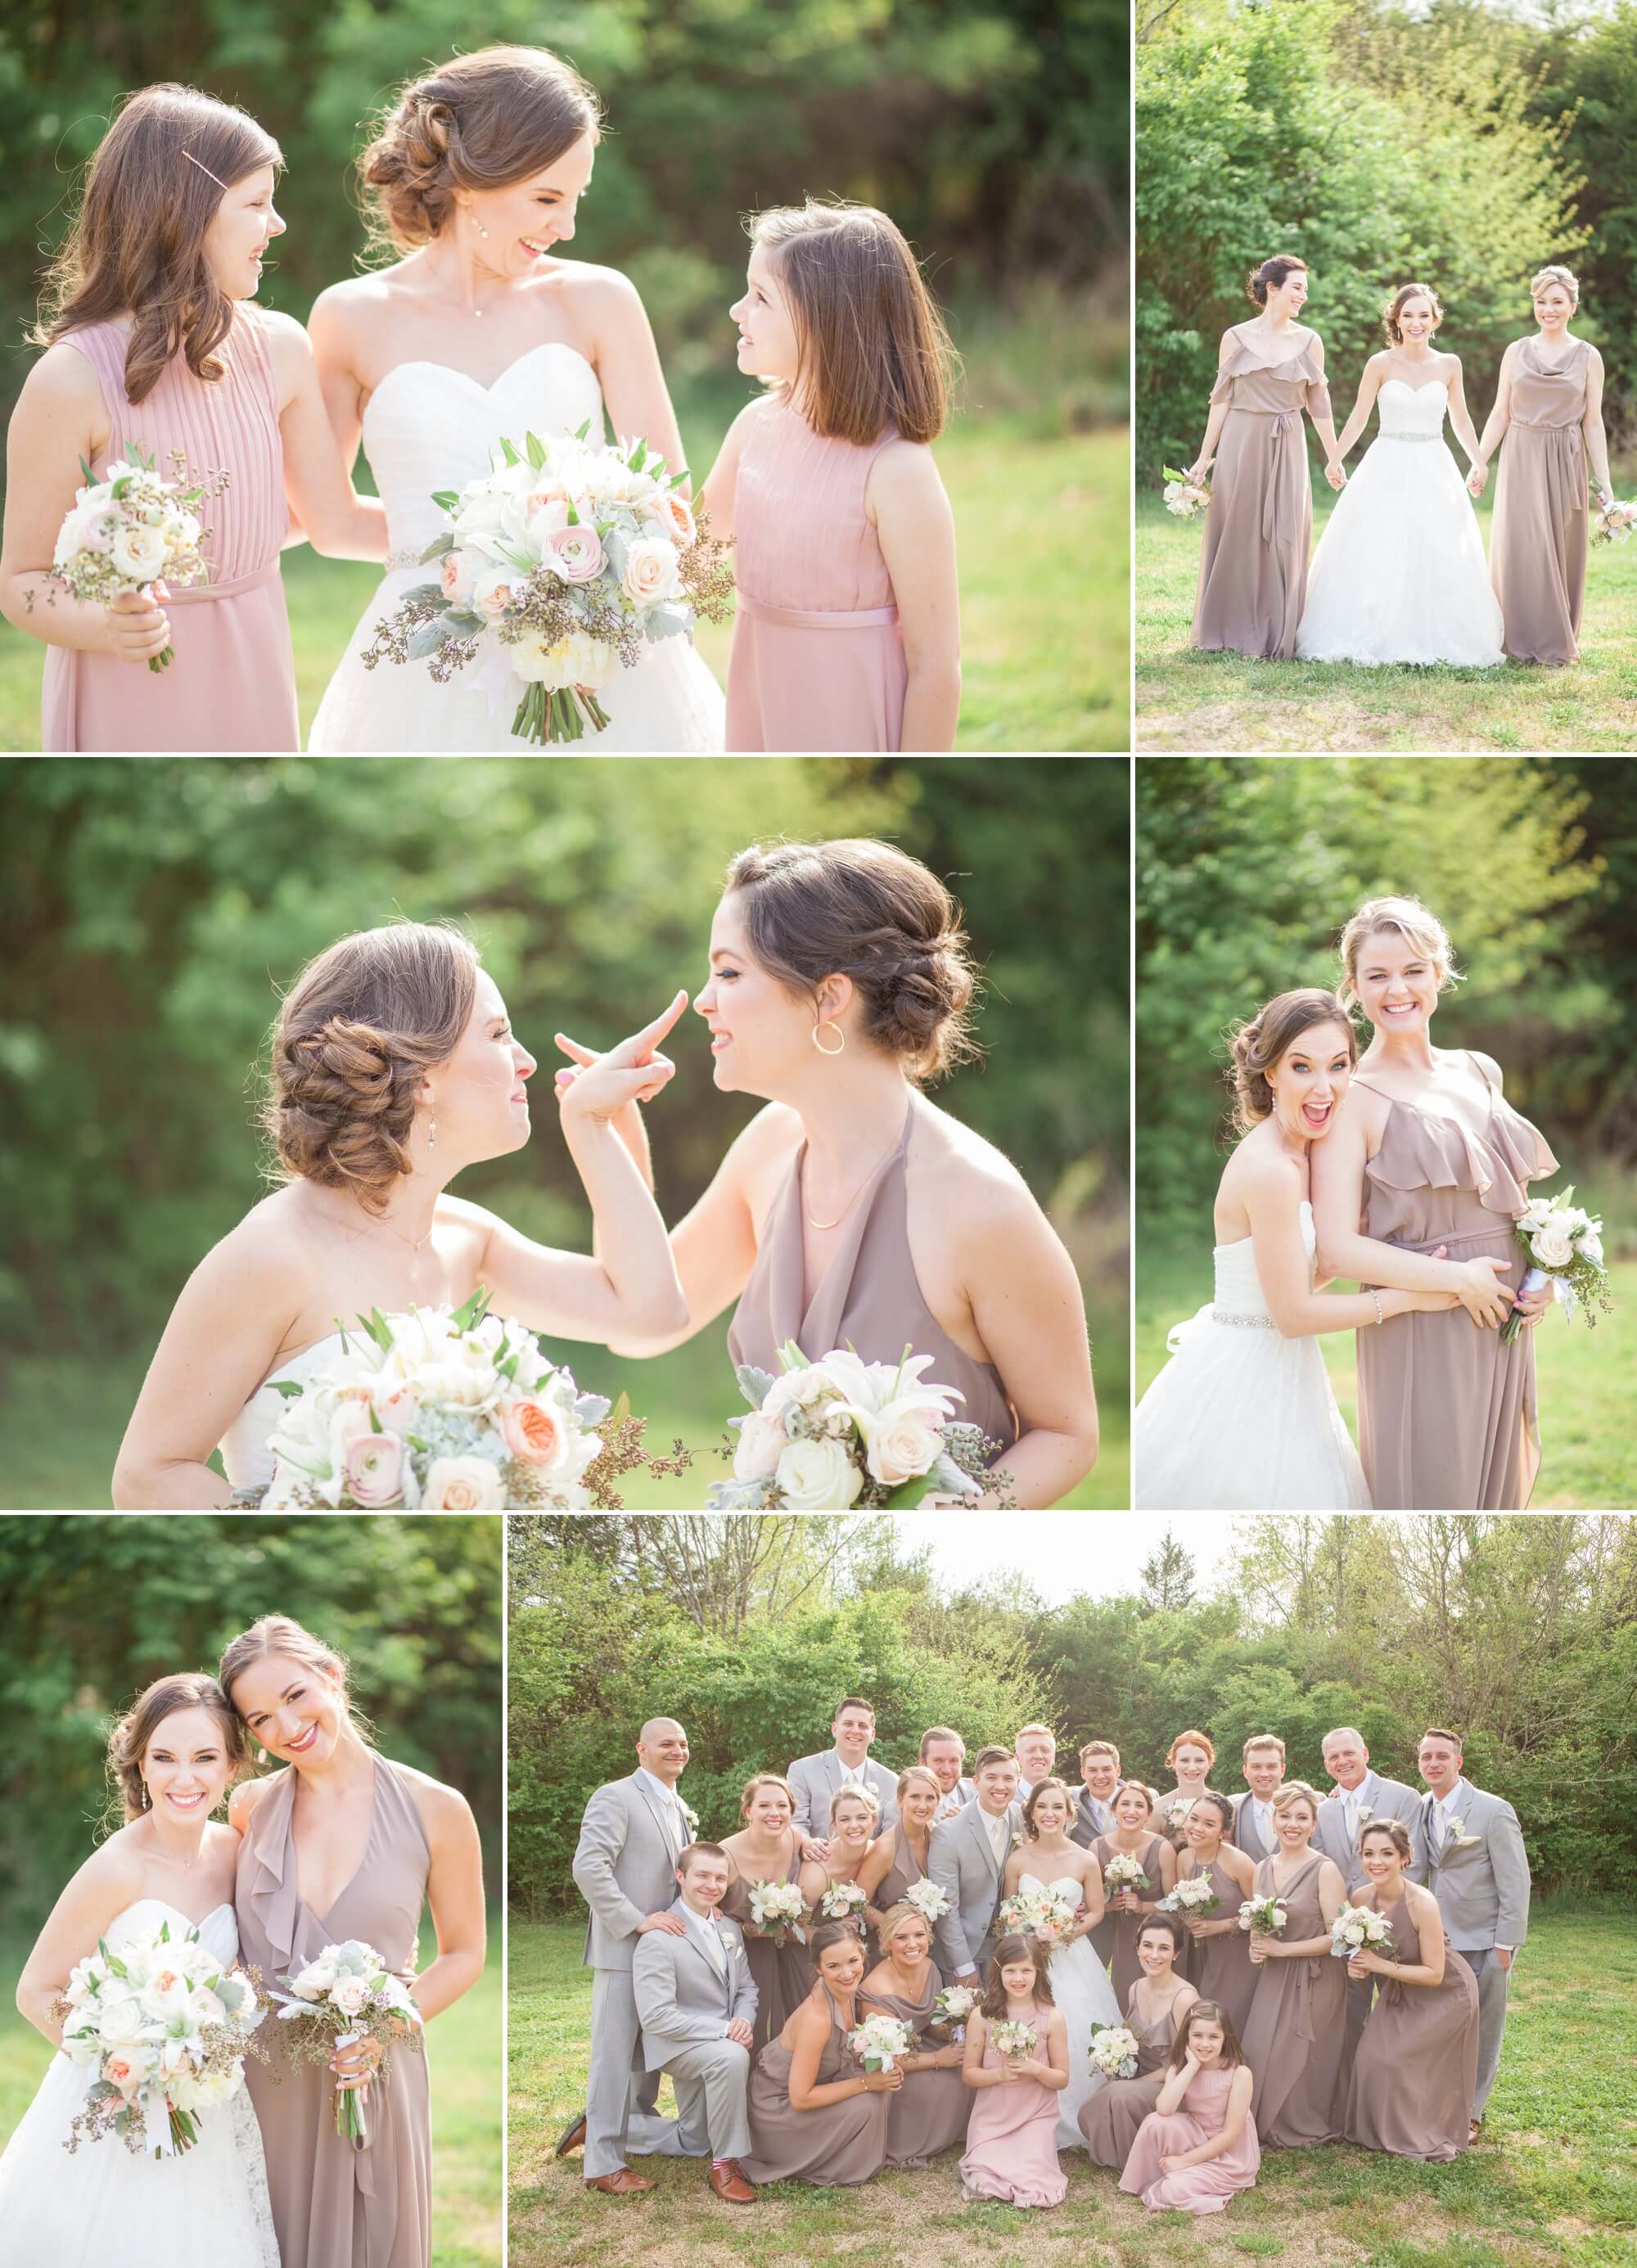 Bridal party and bridesmaid photos with flower girl and bride's sisters before ceremony. Spring wedding at Cedarwood Weddings in Nashville, TN. Photo by Krista Lee Photography, from Sam and Izzy's wedding day.